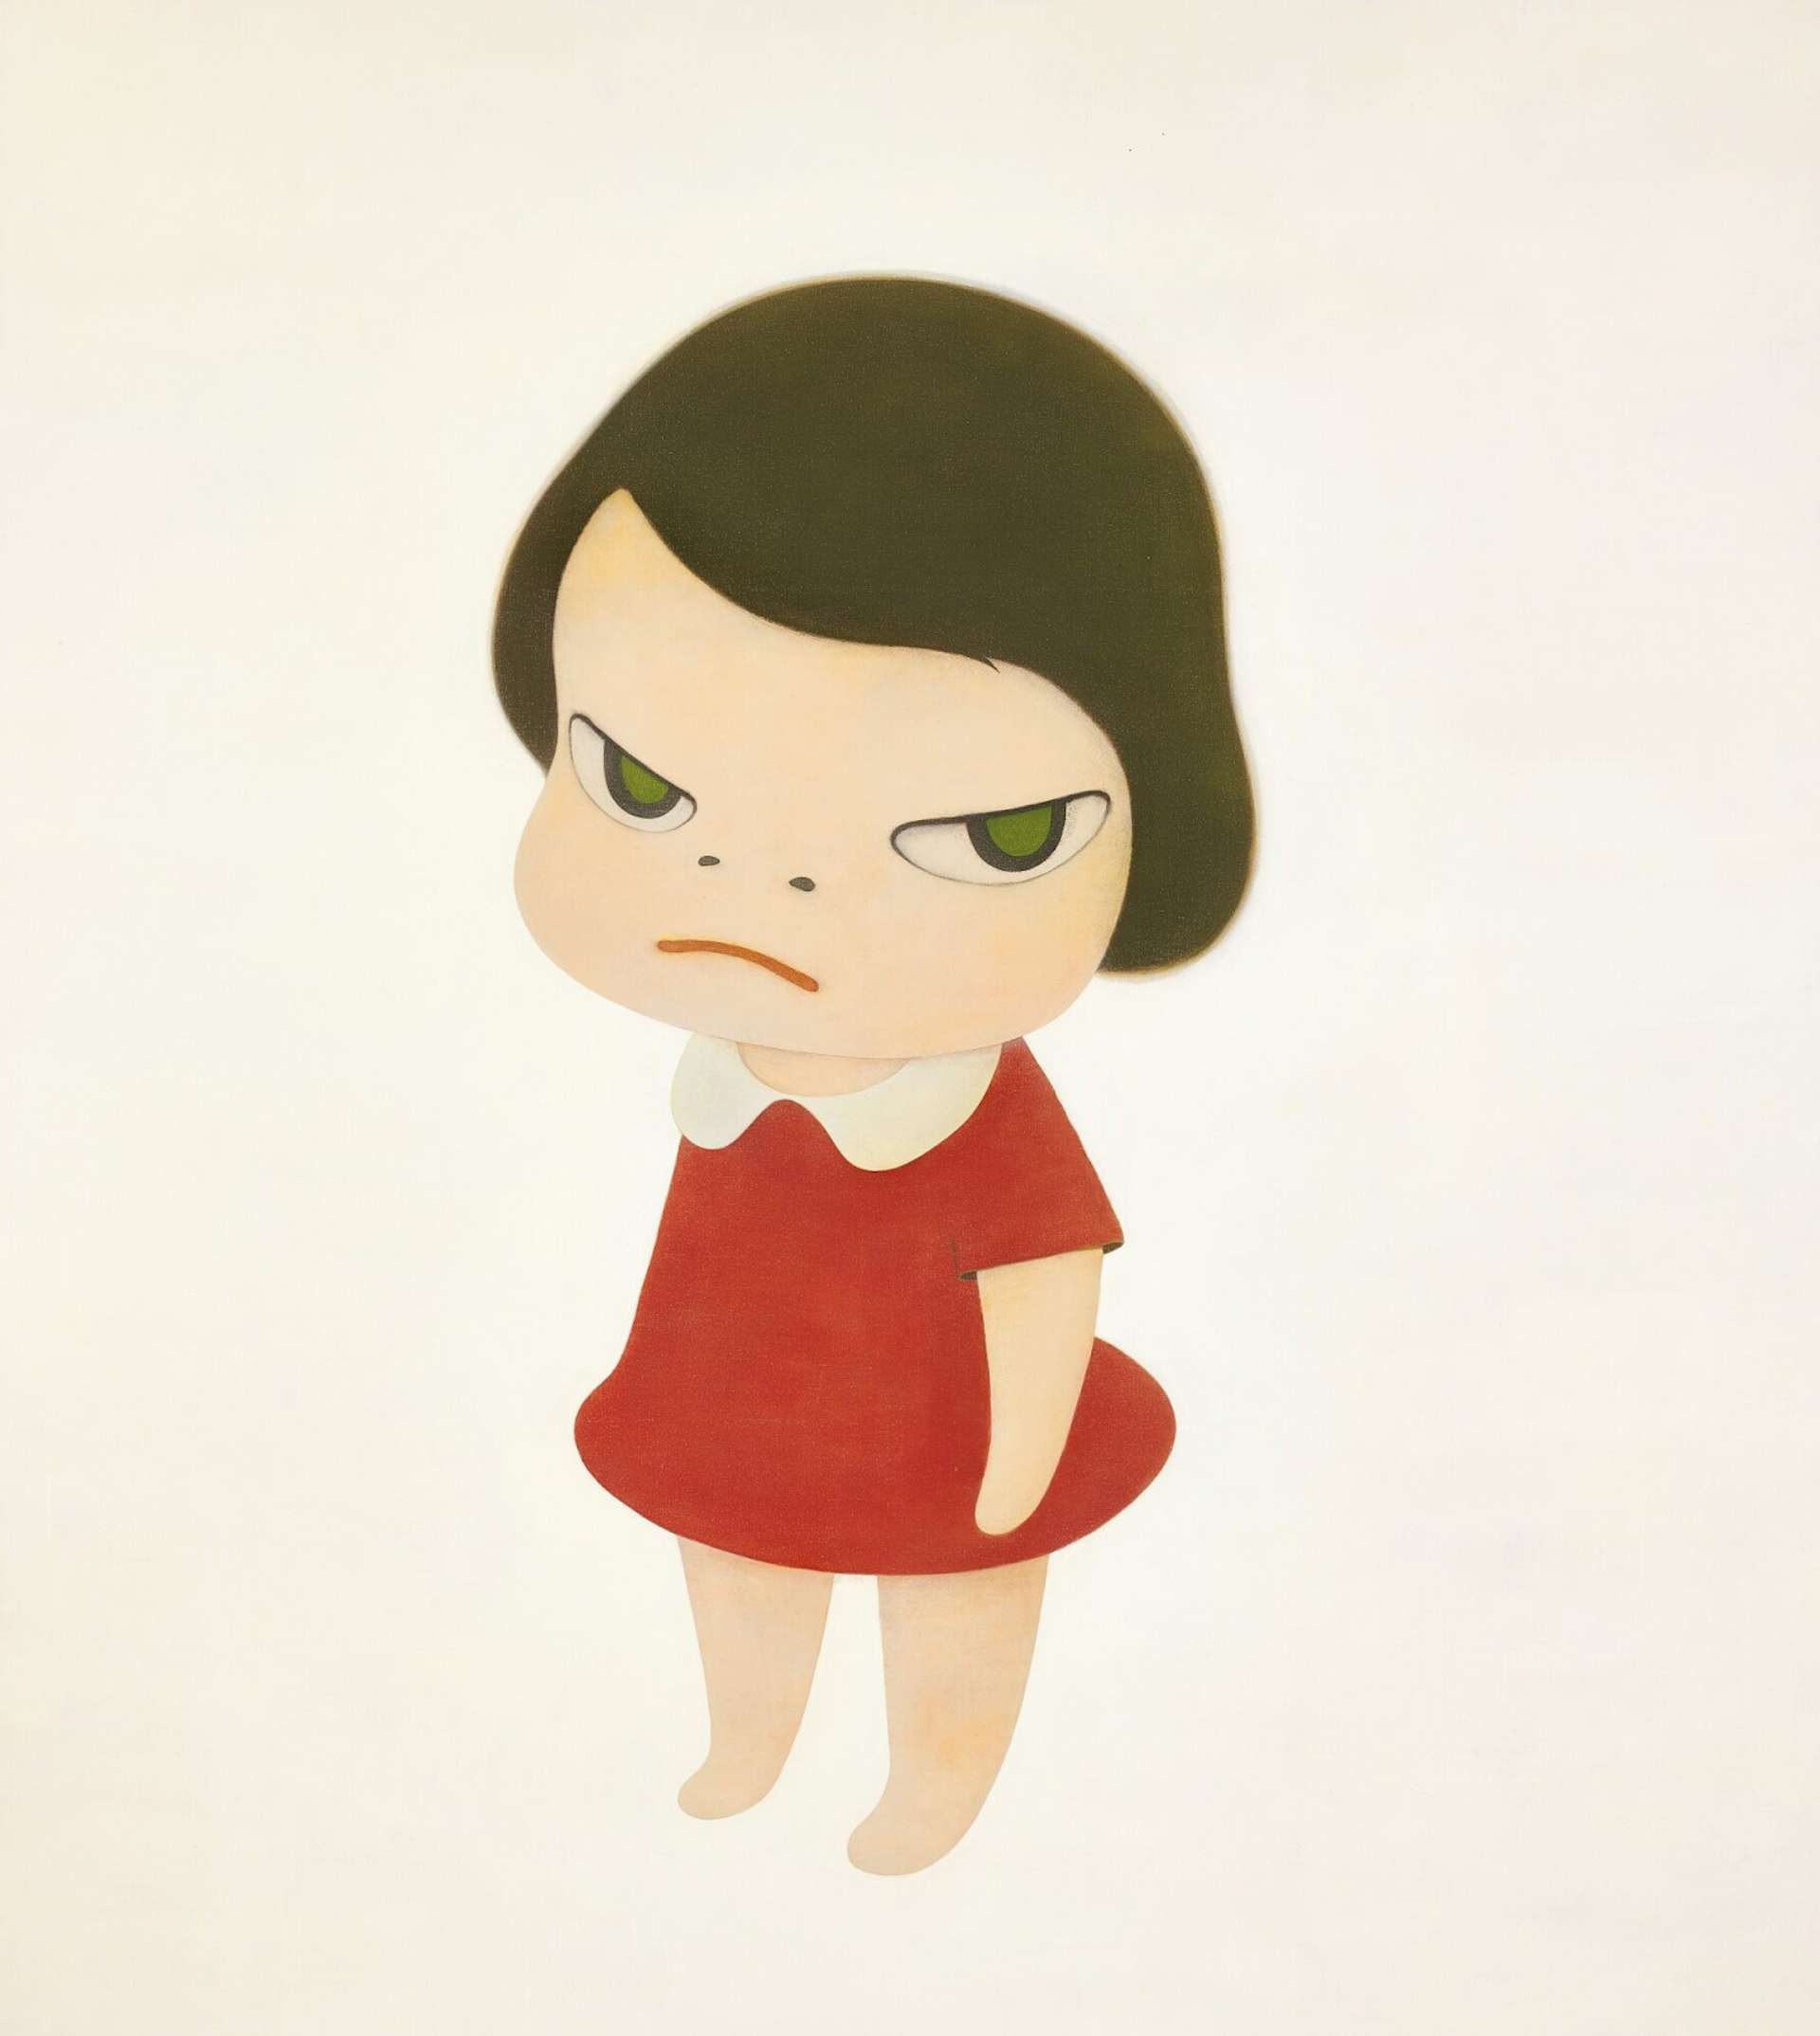 An image of a cartoon brunette girl, wearing a red dress with a white collar. Her expression is menacing, and she has one hand behind her back.